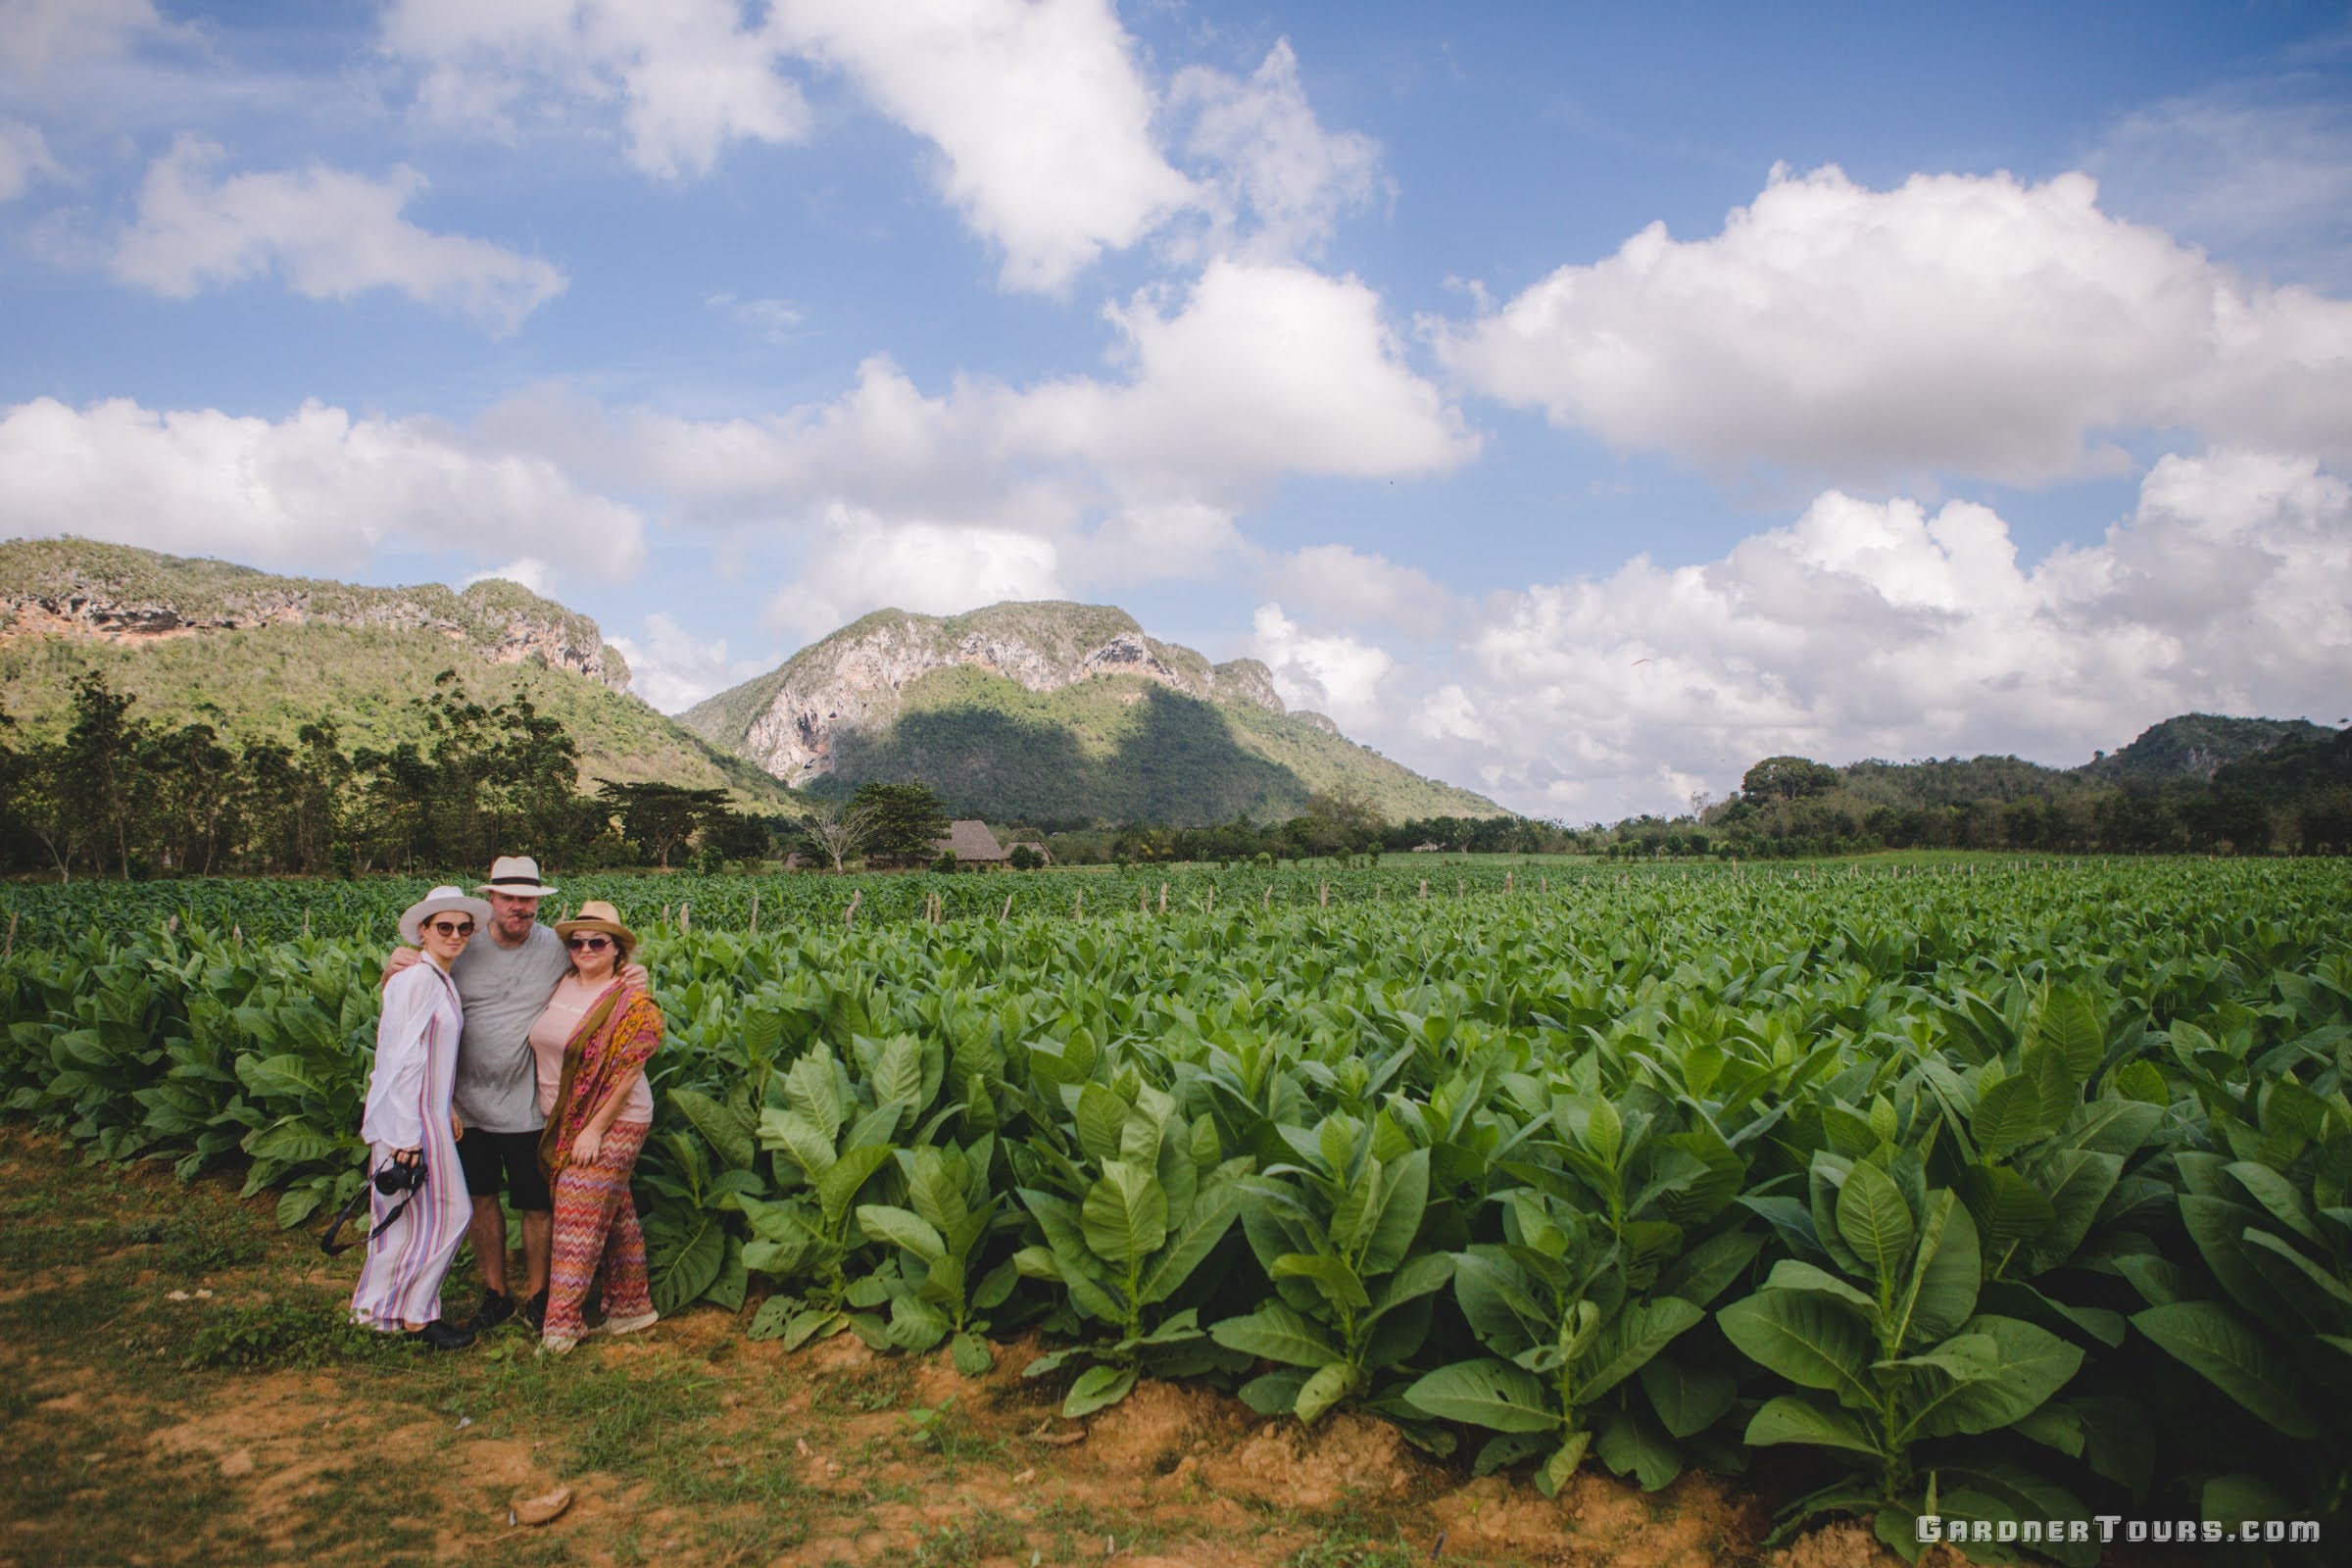 Family of Three Standing in a Tobacco Field in the Valley of Vinales, Cuba